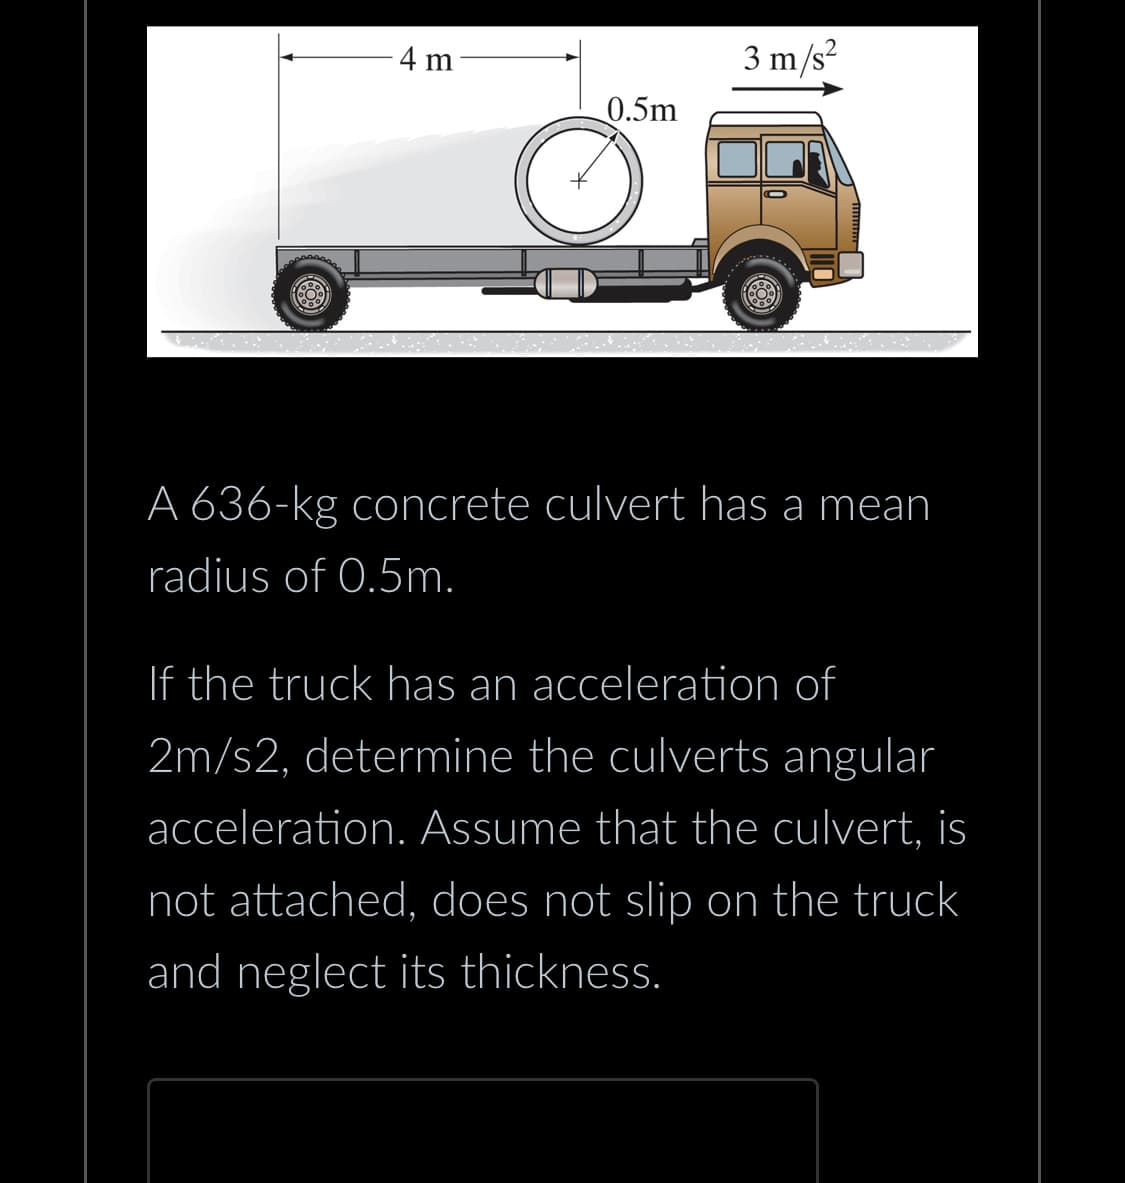 4 m
0.5m
O
3 m/s²
A 636-kg concrete culvert has a mean
radius of 0.5m.
If the truck has an acceleration of
2m/s2, determine the culverts angular
acceleration. Assume that the culvert, is
not attached, does not slip on the truck
and neglect its thickness.